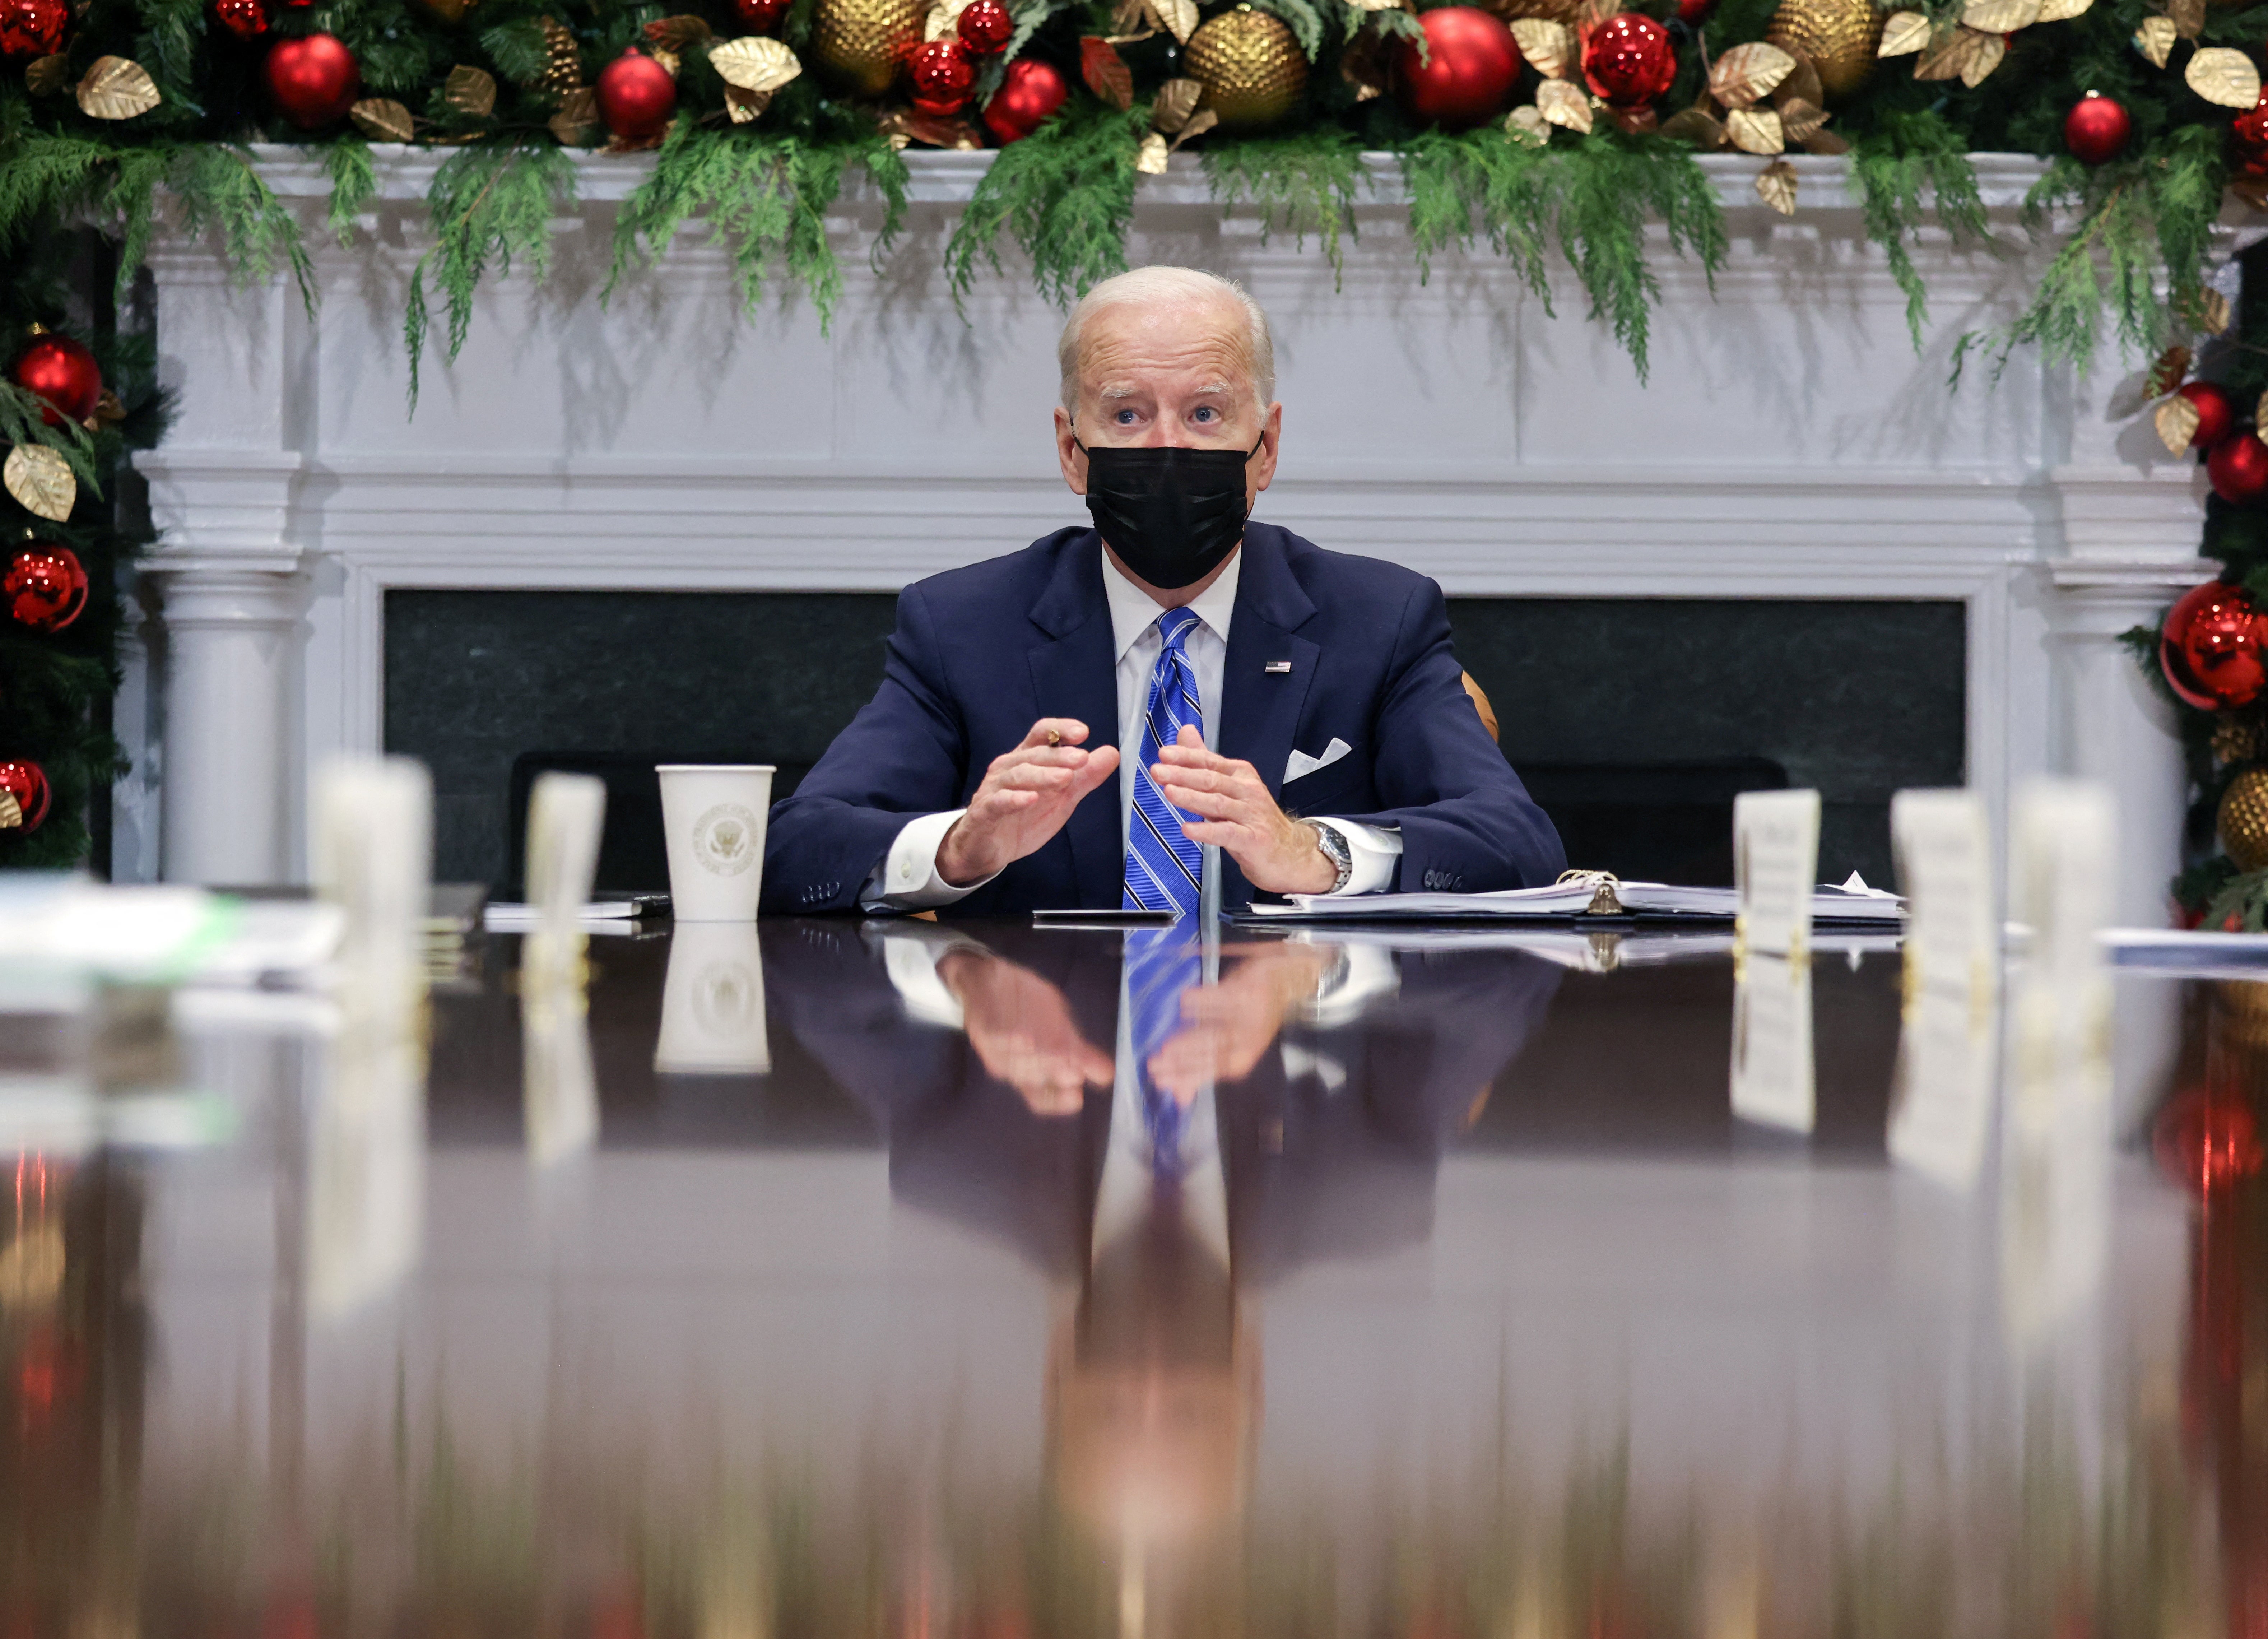 US president Joe Biden warned winter of severe illness and death for the unvaccinated after meeting with members of the White House Covid Response Team